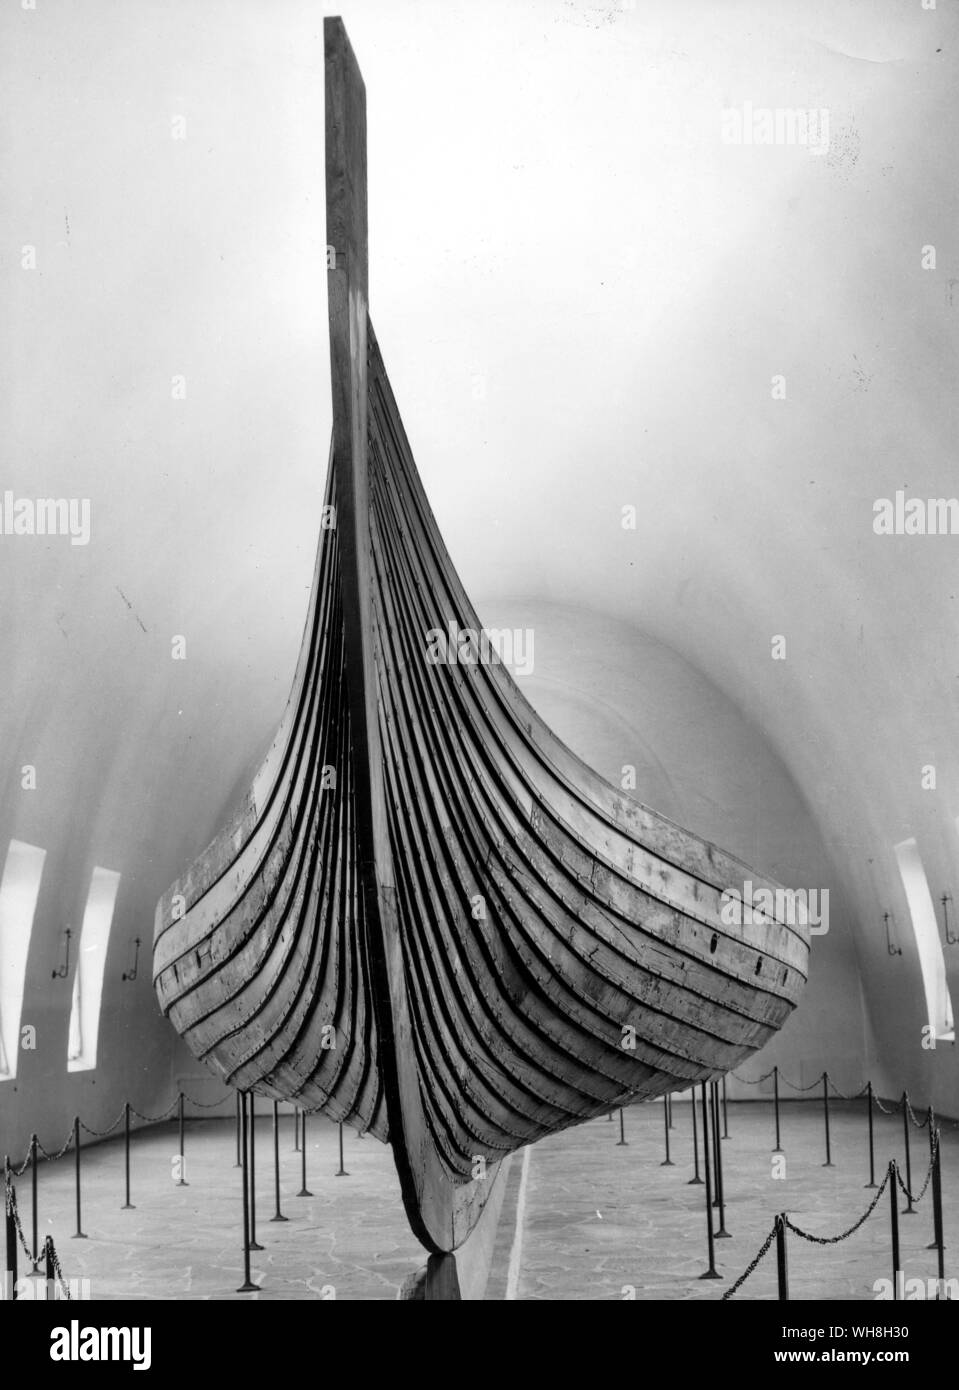 The Gokstad ship, a true Dragon ship, built c. 850-900. The Opening of the World by David Divine, page 59. Stock Photo